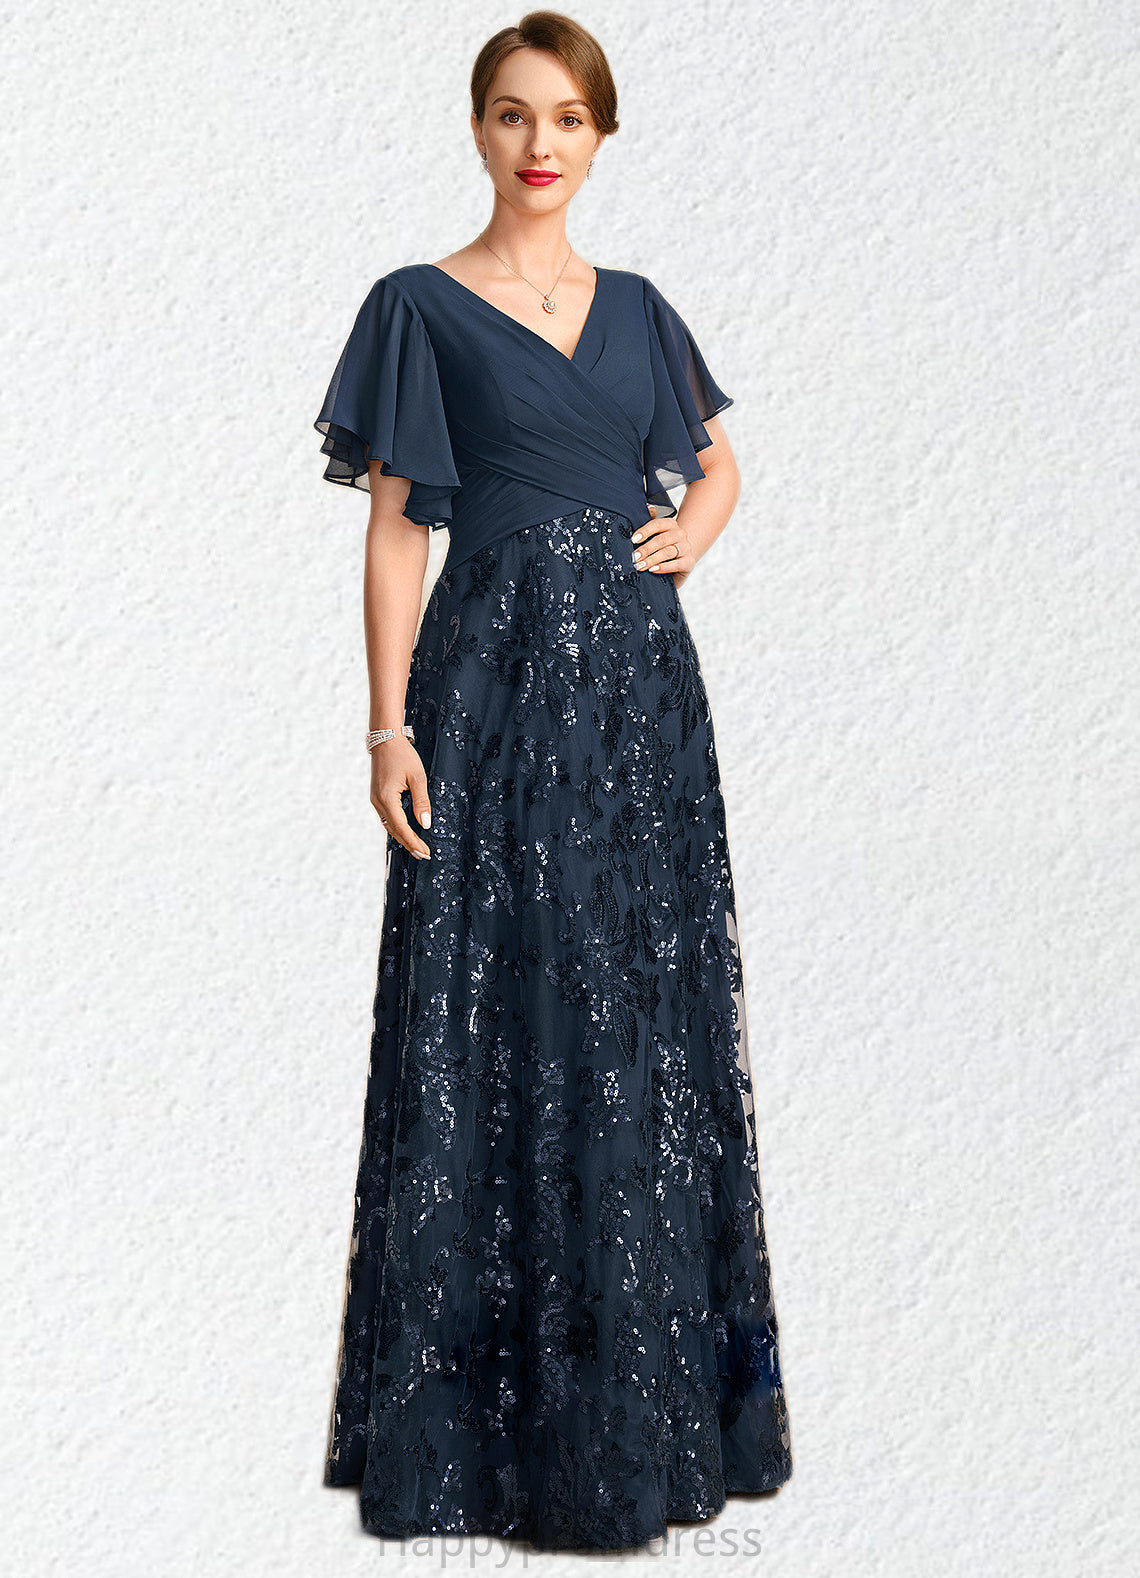 Sydney A-line V-Neck Floor-Length Chiffon Lace Sequin Mother of the Bride Dress With Pleated XXSP0021648